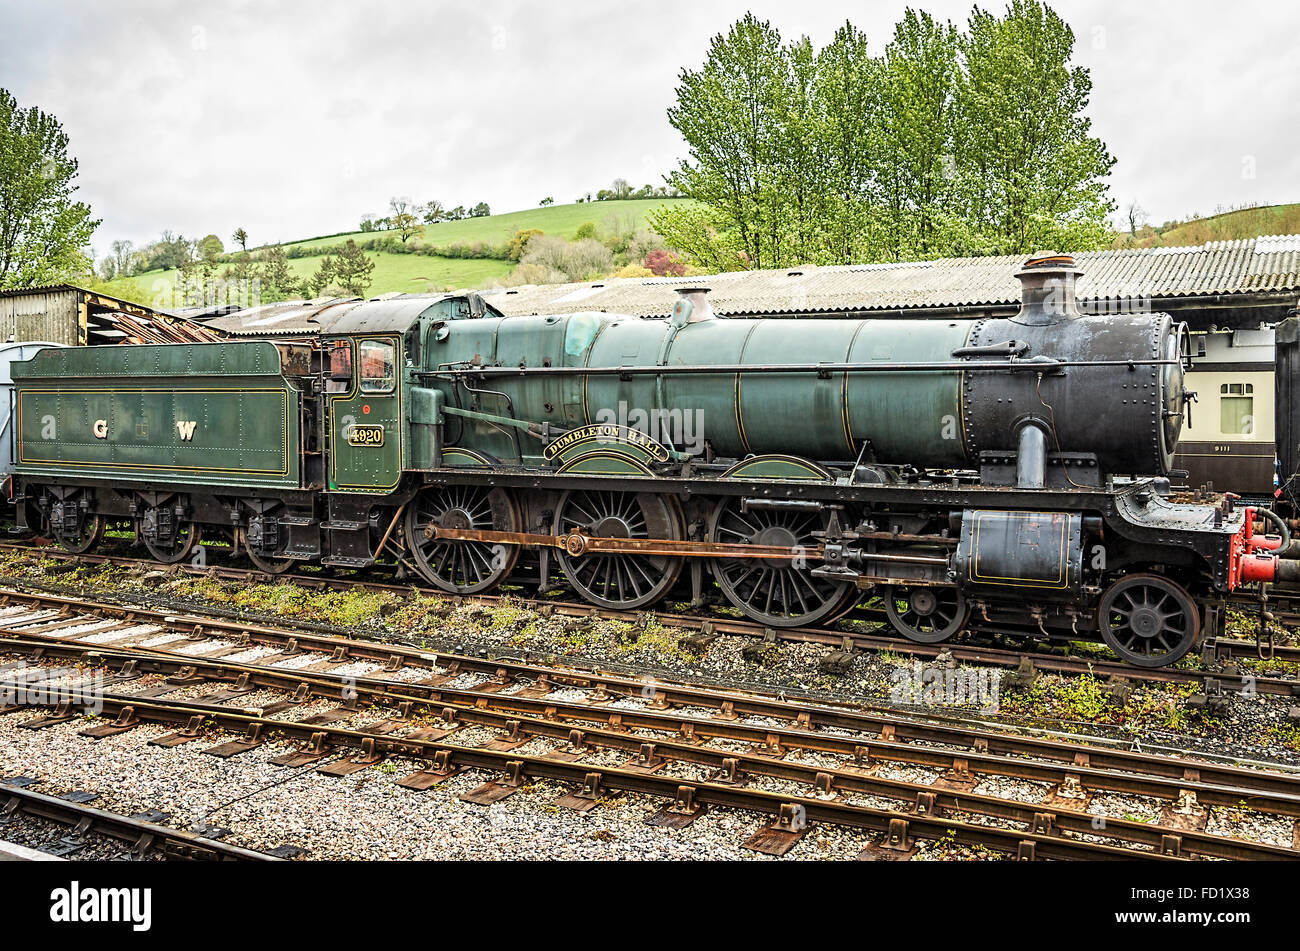 No 4920 DUMBLETON HALL standing idle in a siding at Buckfastleigh railway station Stock Photo